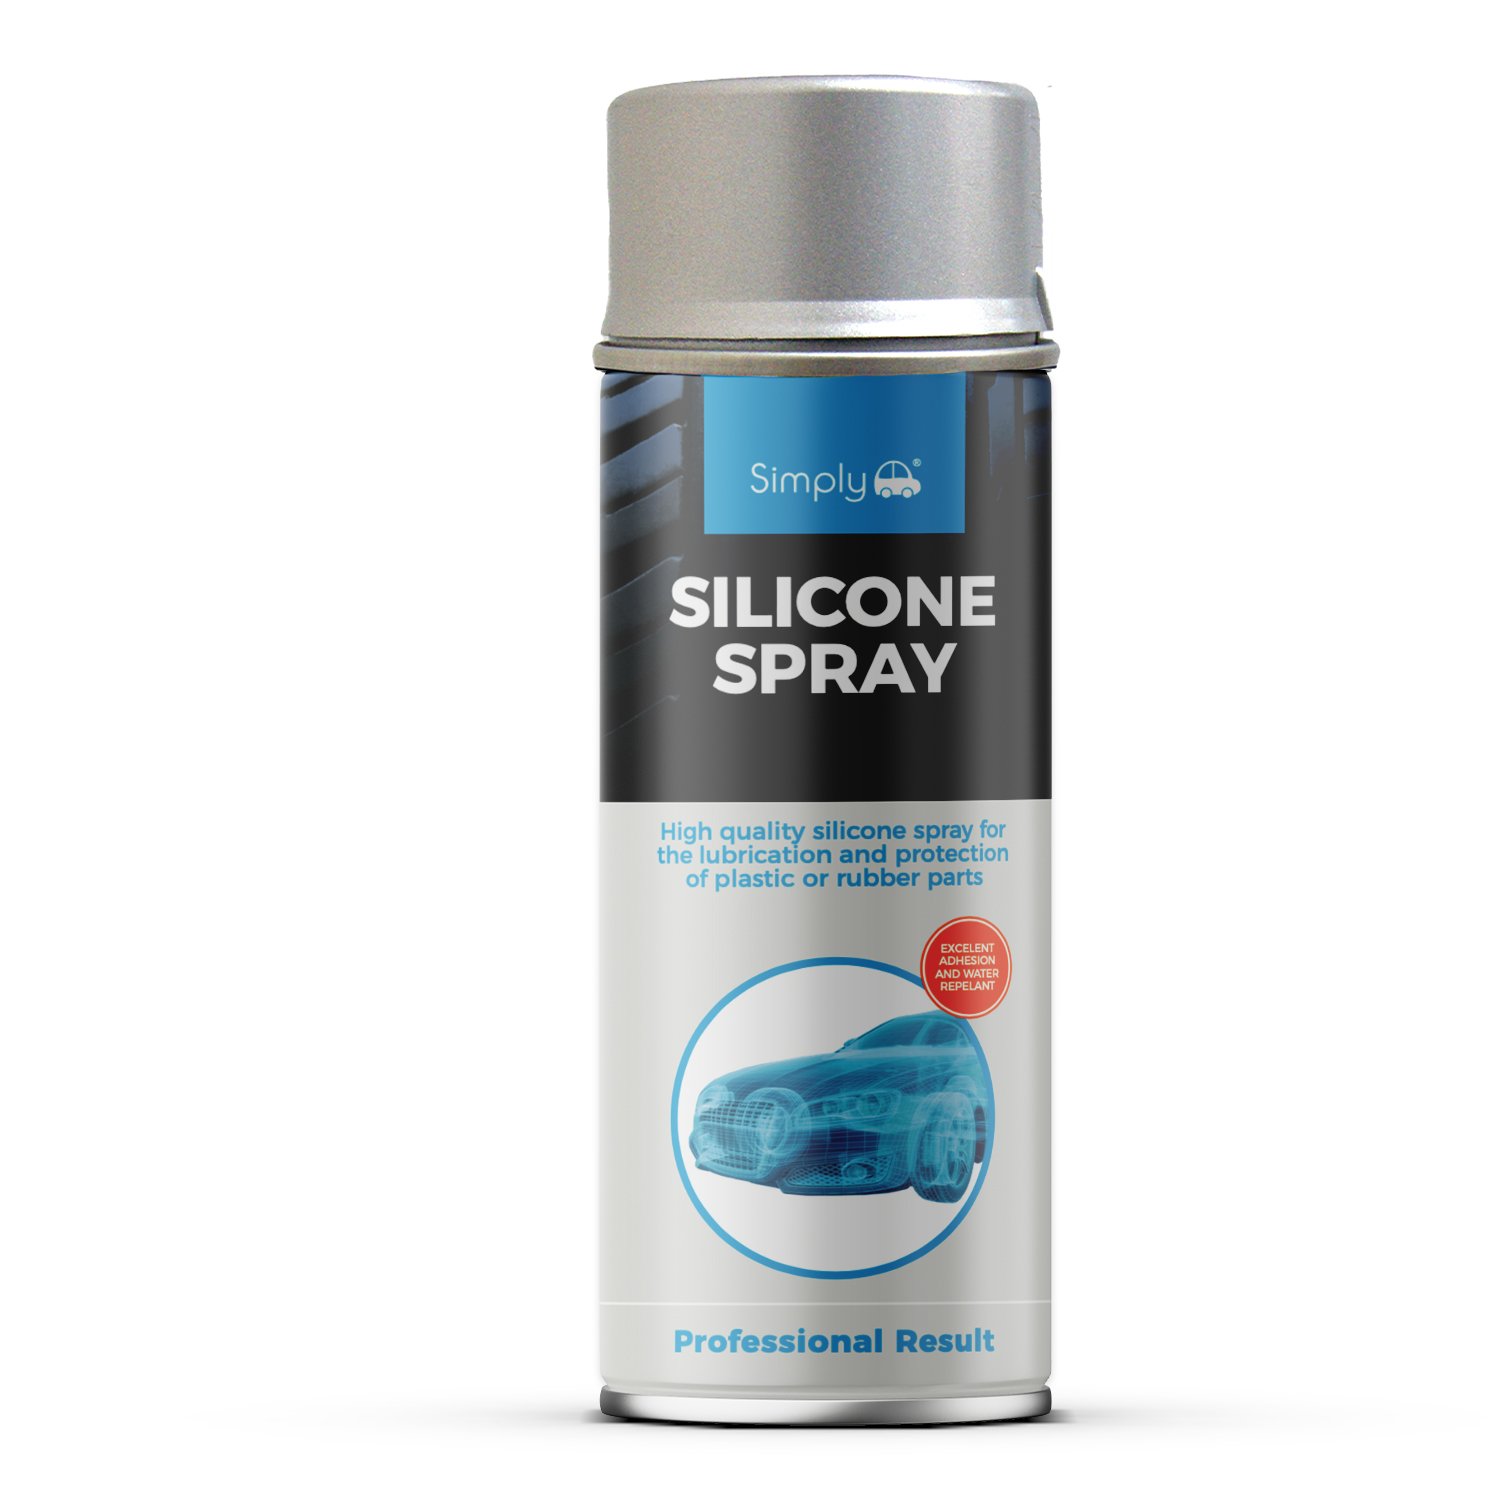 The Many Ways You Can Use Silicone Spray